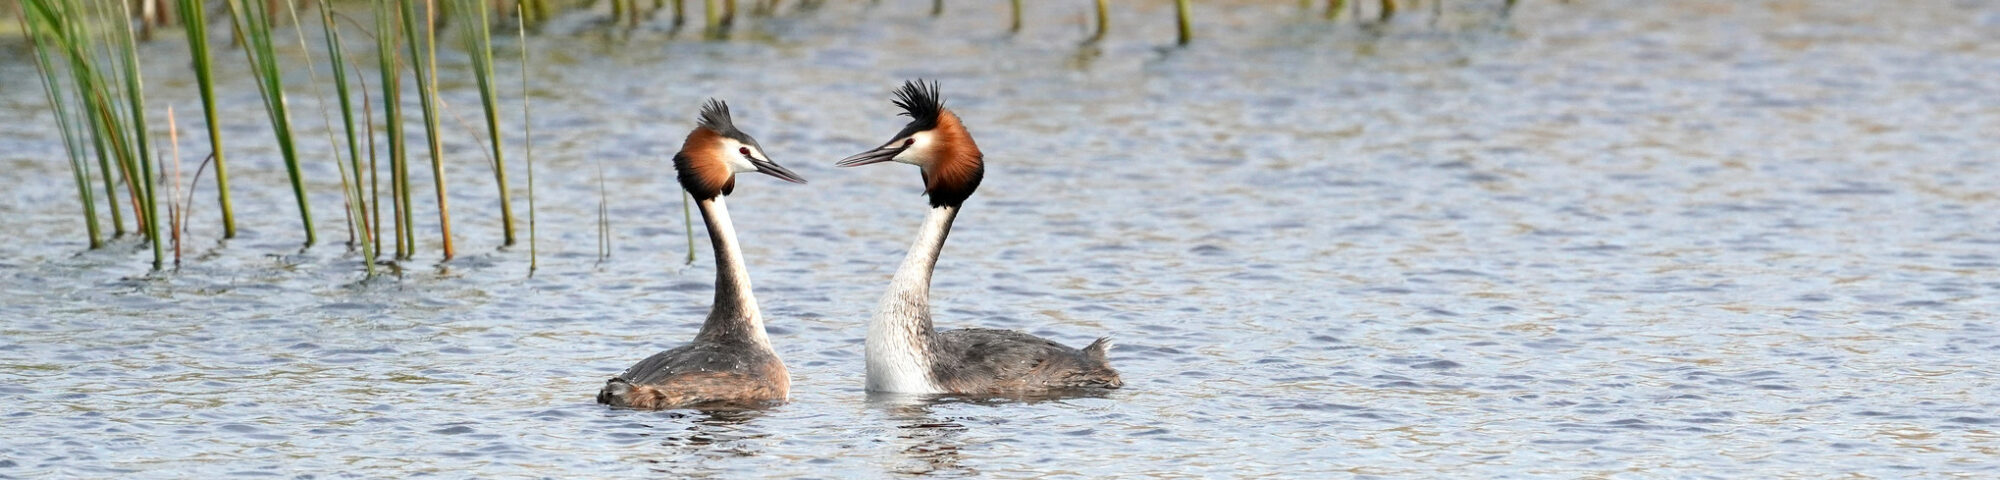 Great Crested Grebes By Jim Higham Aspect Ratio 2000 480